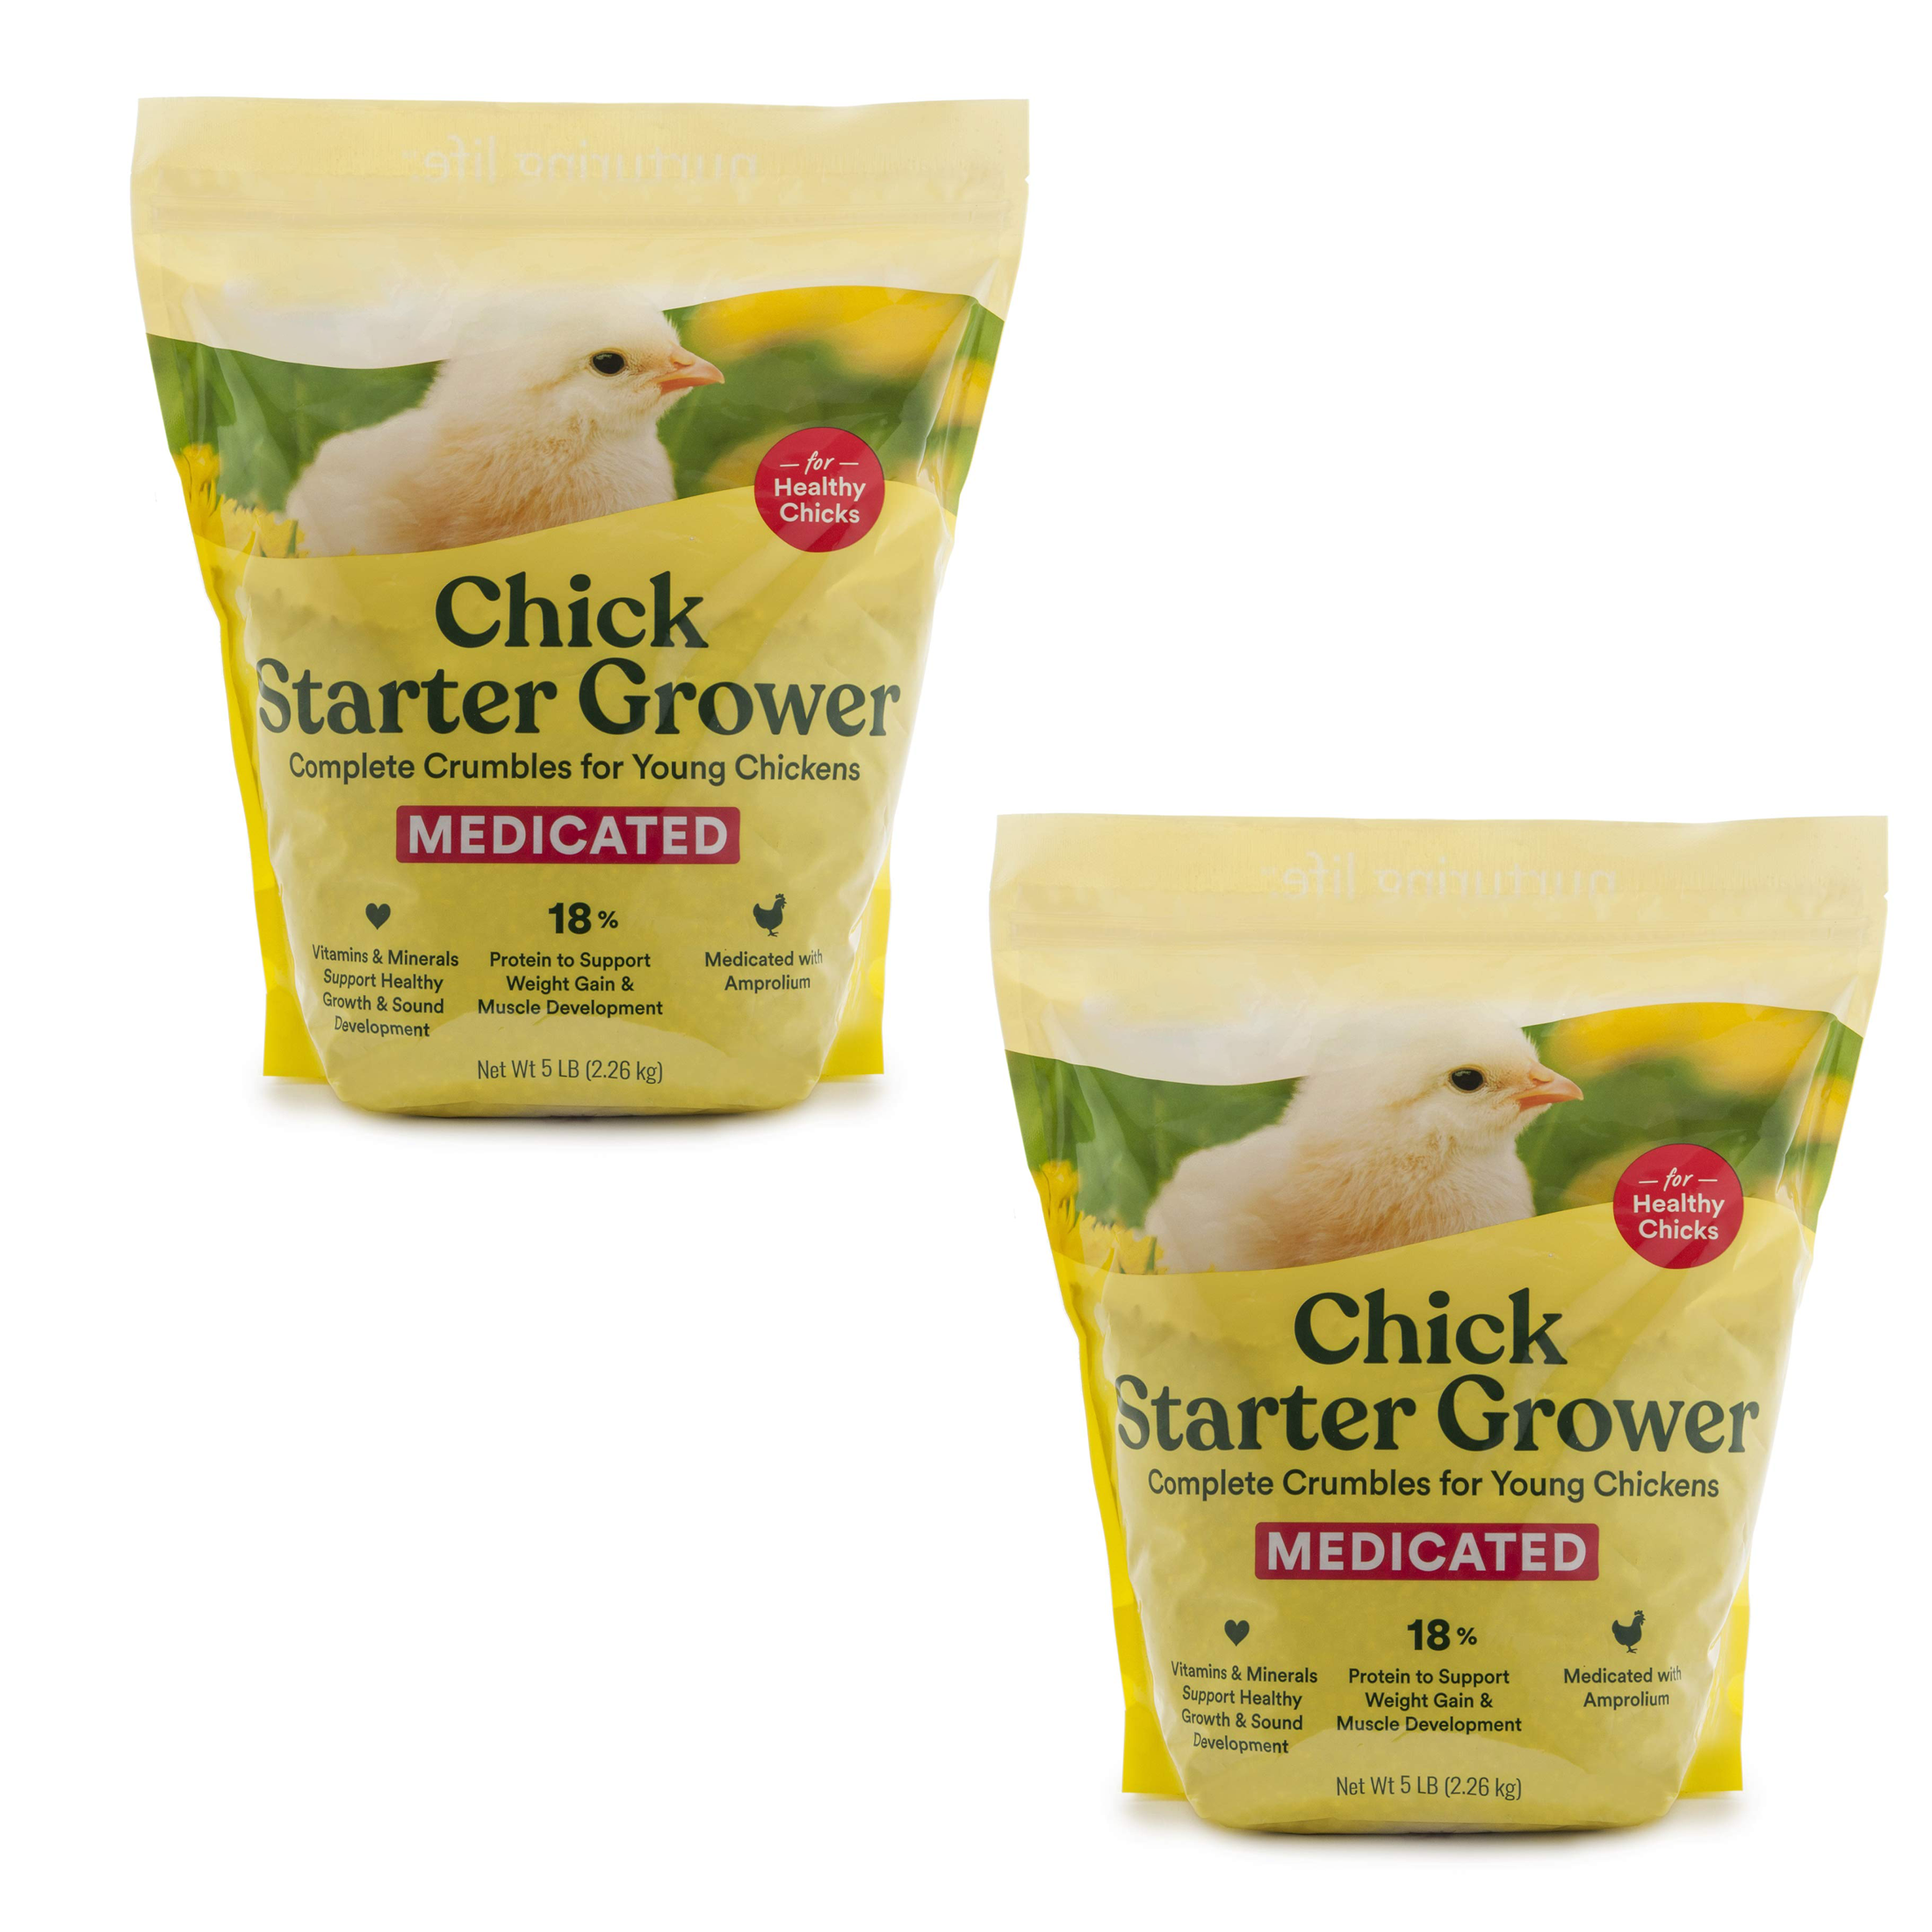 Medicated Chick Feed Crumble for Young Chickens - Formulated with Ampr